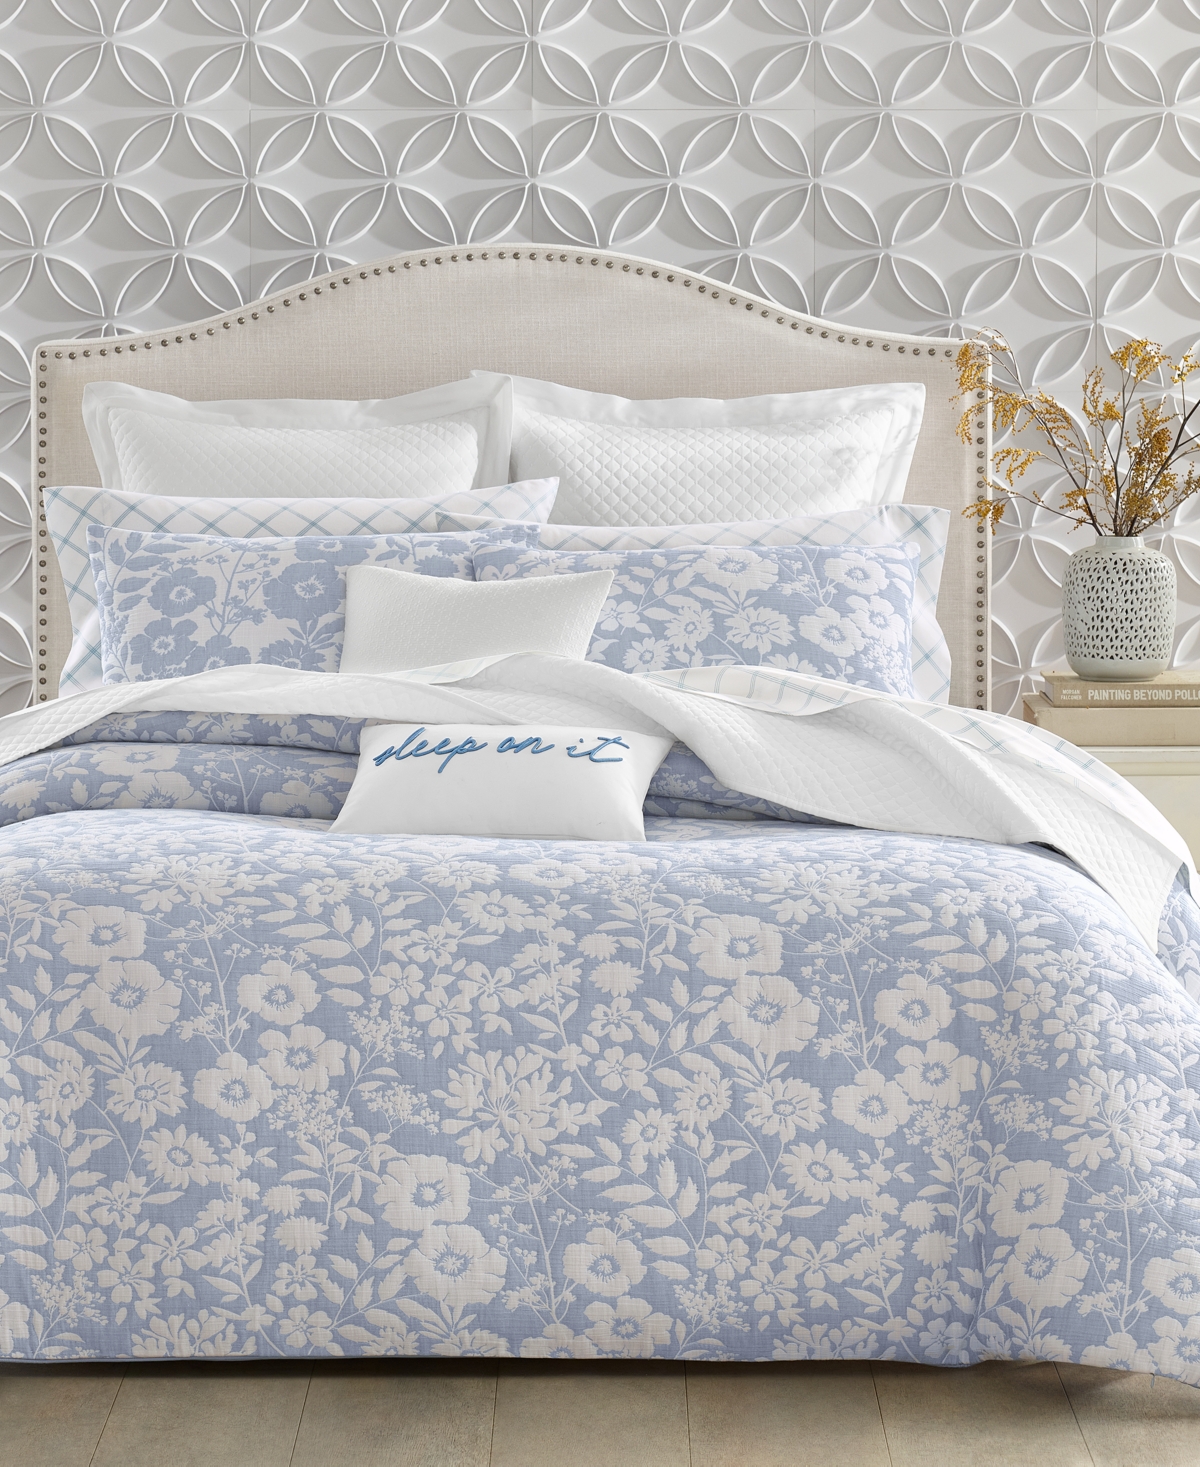 Charter Club Silhouette Floral 3-pc. Comforter Set, Full/queen, Created For Macy's In Blue